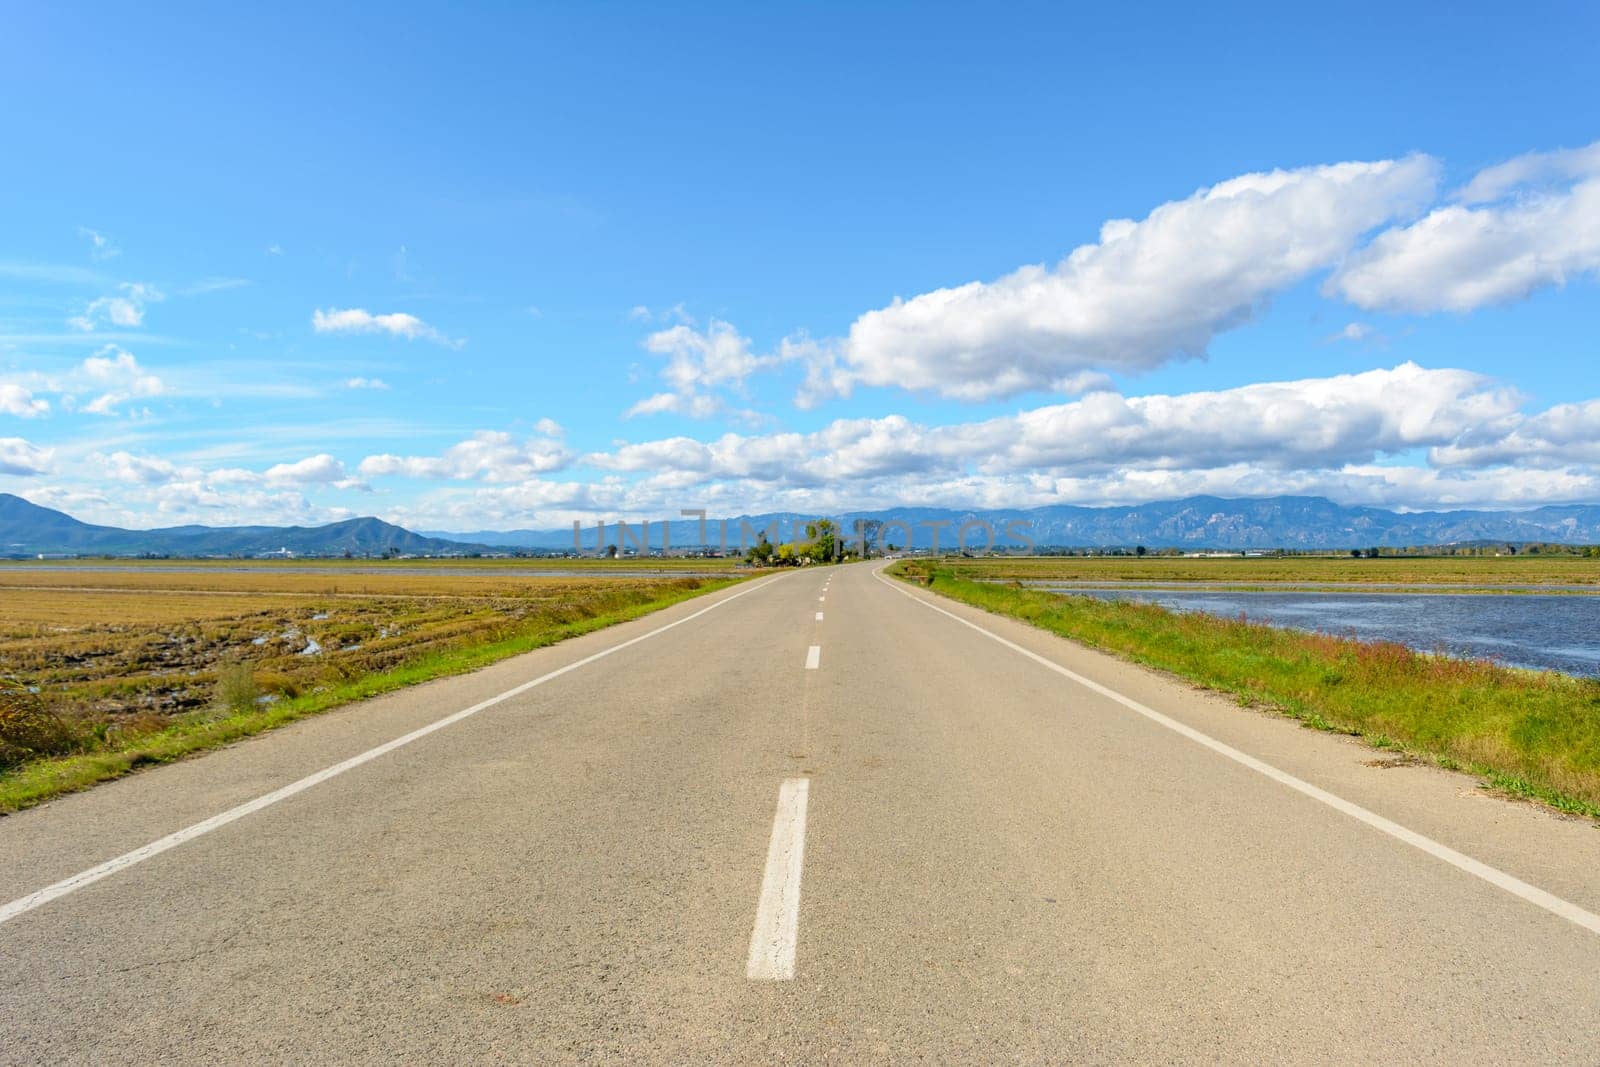 A straight road leading towards mountains under a bright blue sky with clouds, view of lonely road in the ebro delta, tarragona, catalonia, spain,